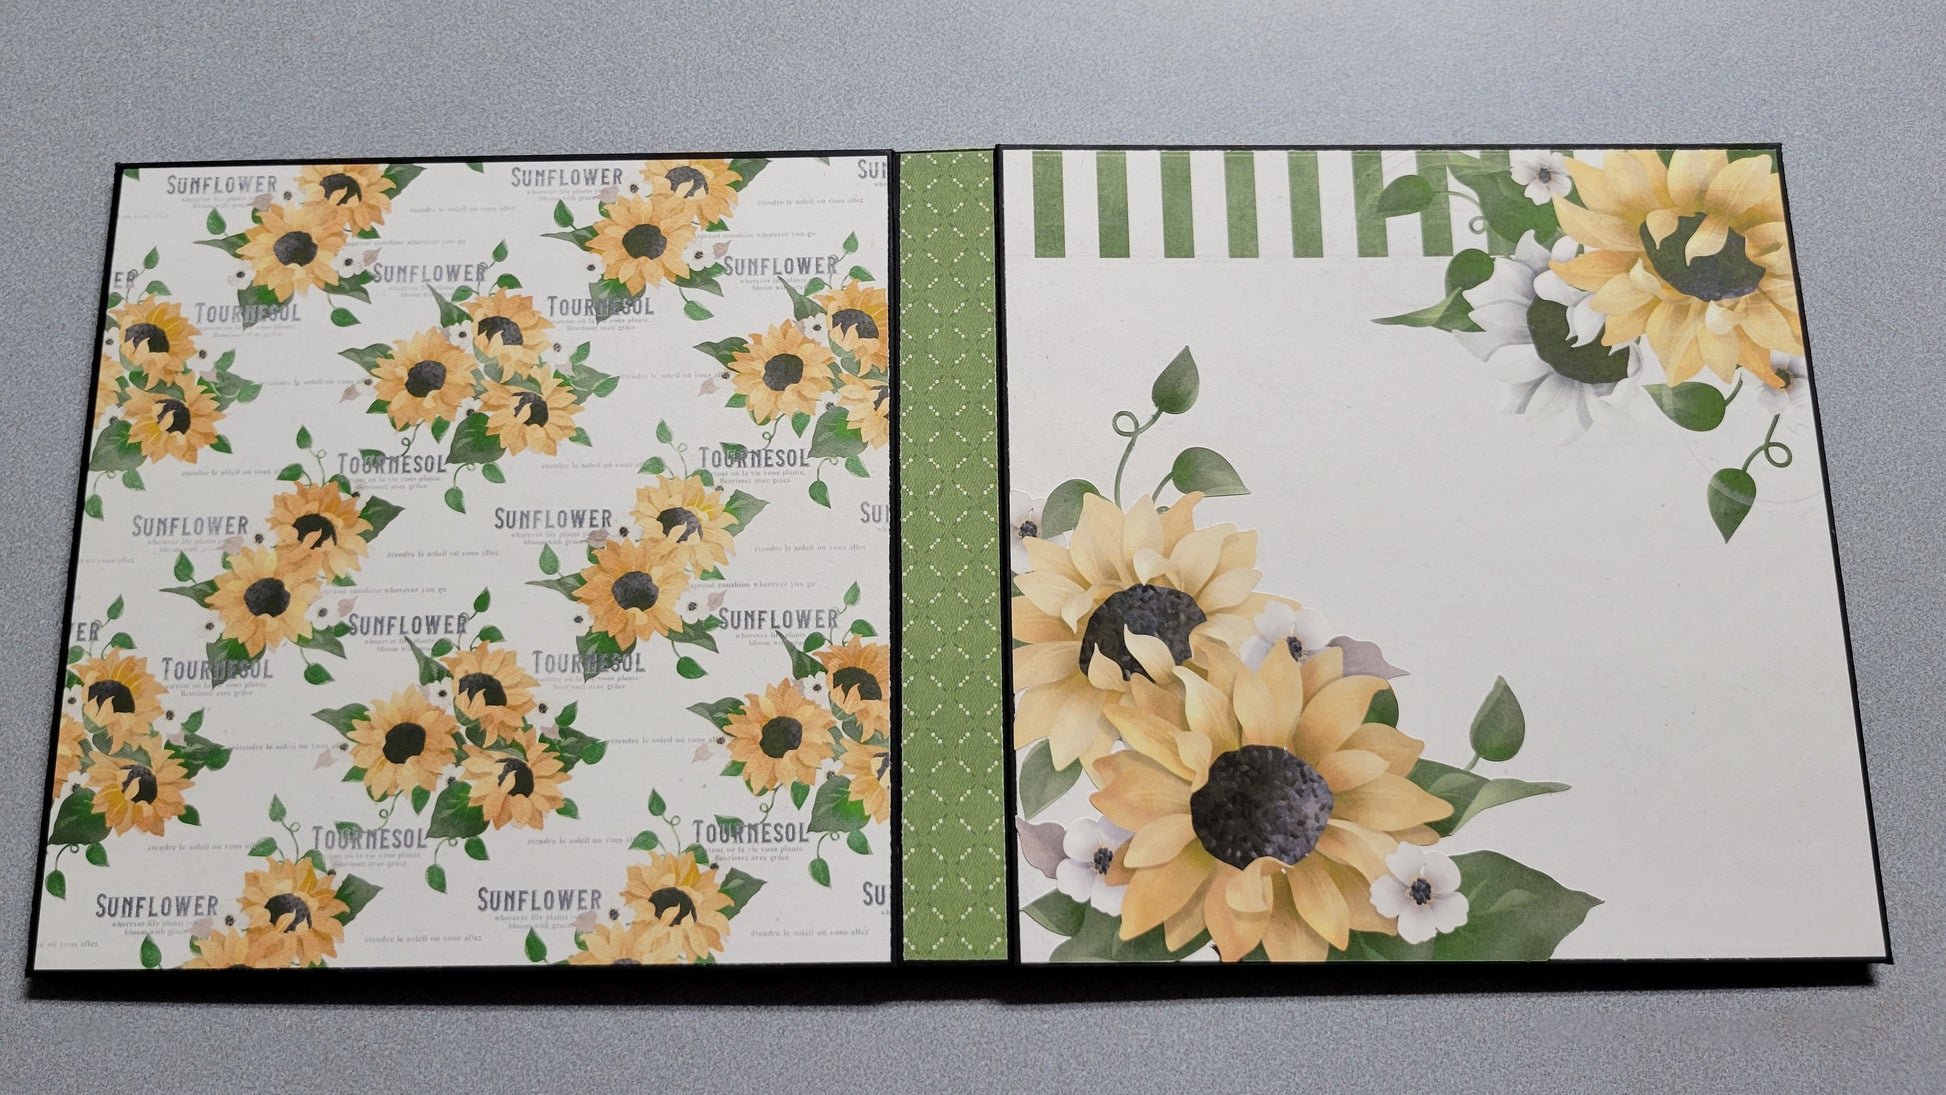 Sunflowers Photo Albums back and front covers.